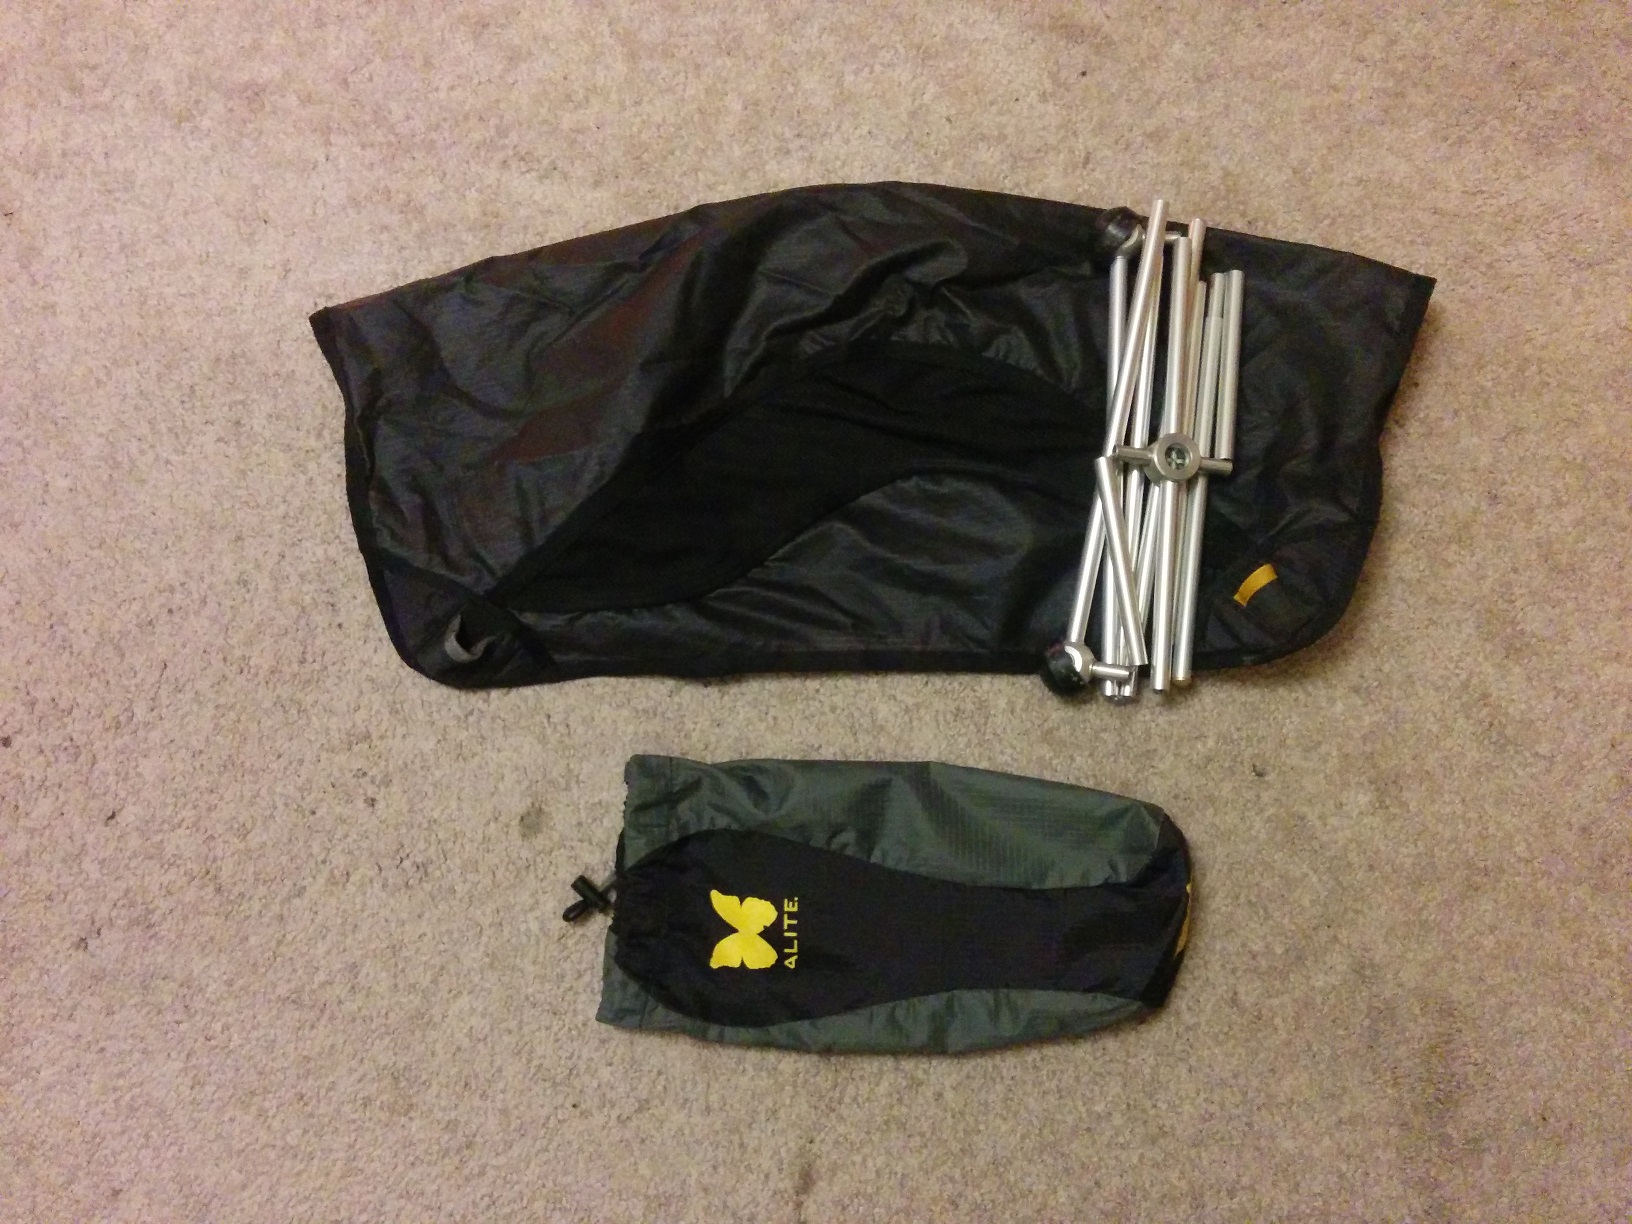 The camping chair, shown unpacked from its bag but still folded up.